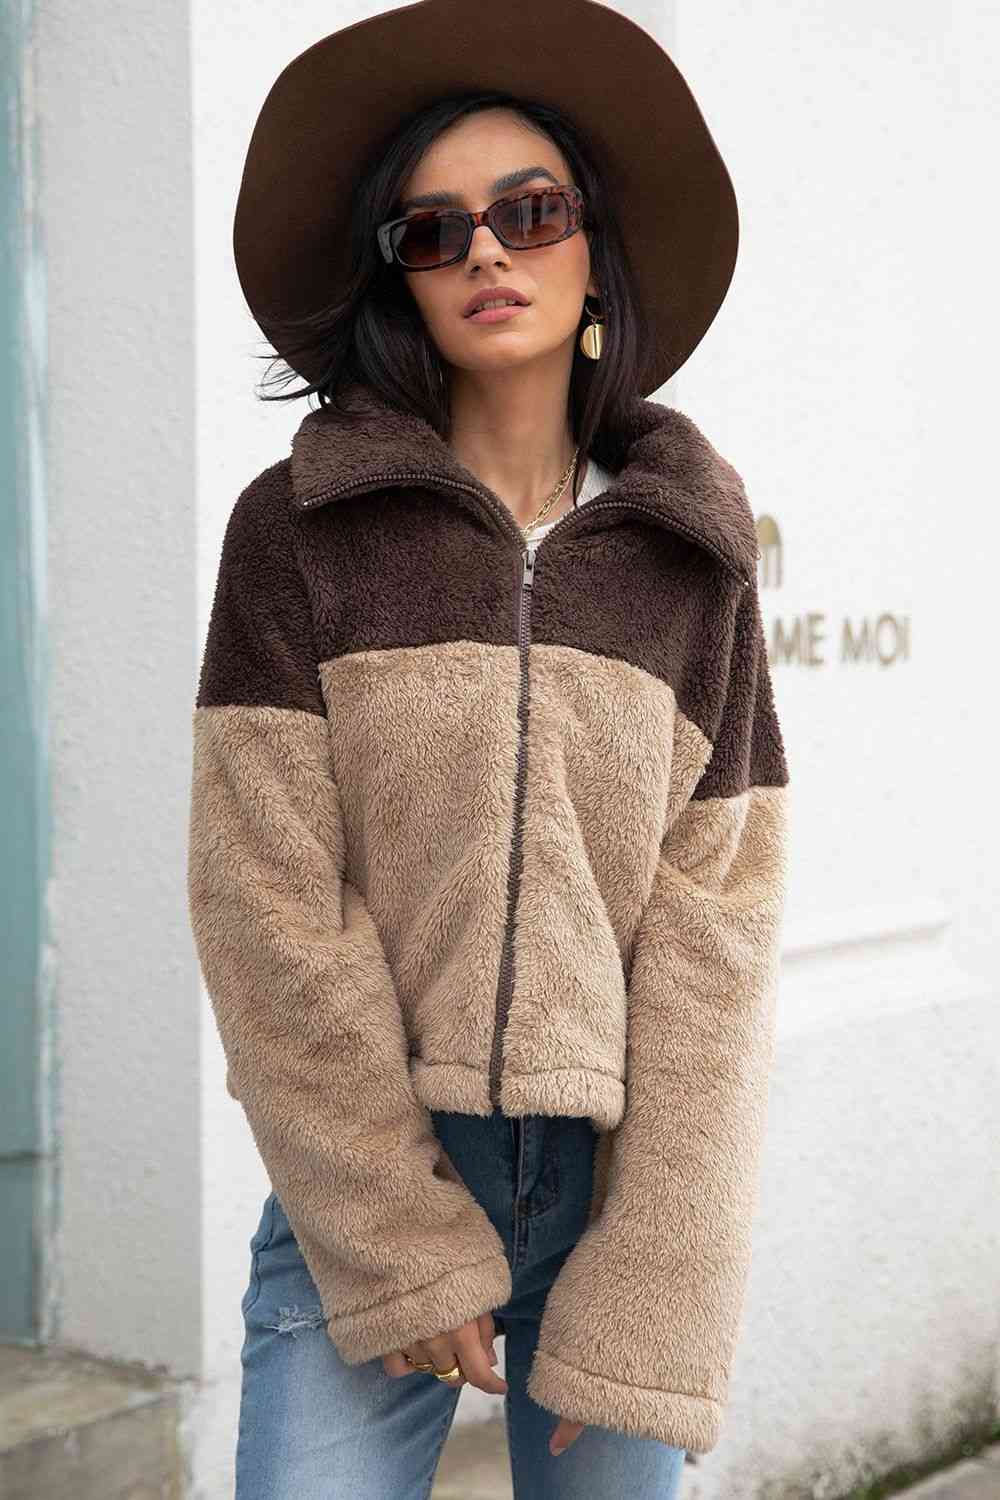 A 'Neck Fuzzy Jacket,' a cozy and warm jacket typically featuring a soft and fuzzy material around the neck or collar area, providing comfort and style for chilly weather.